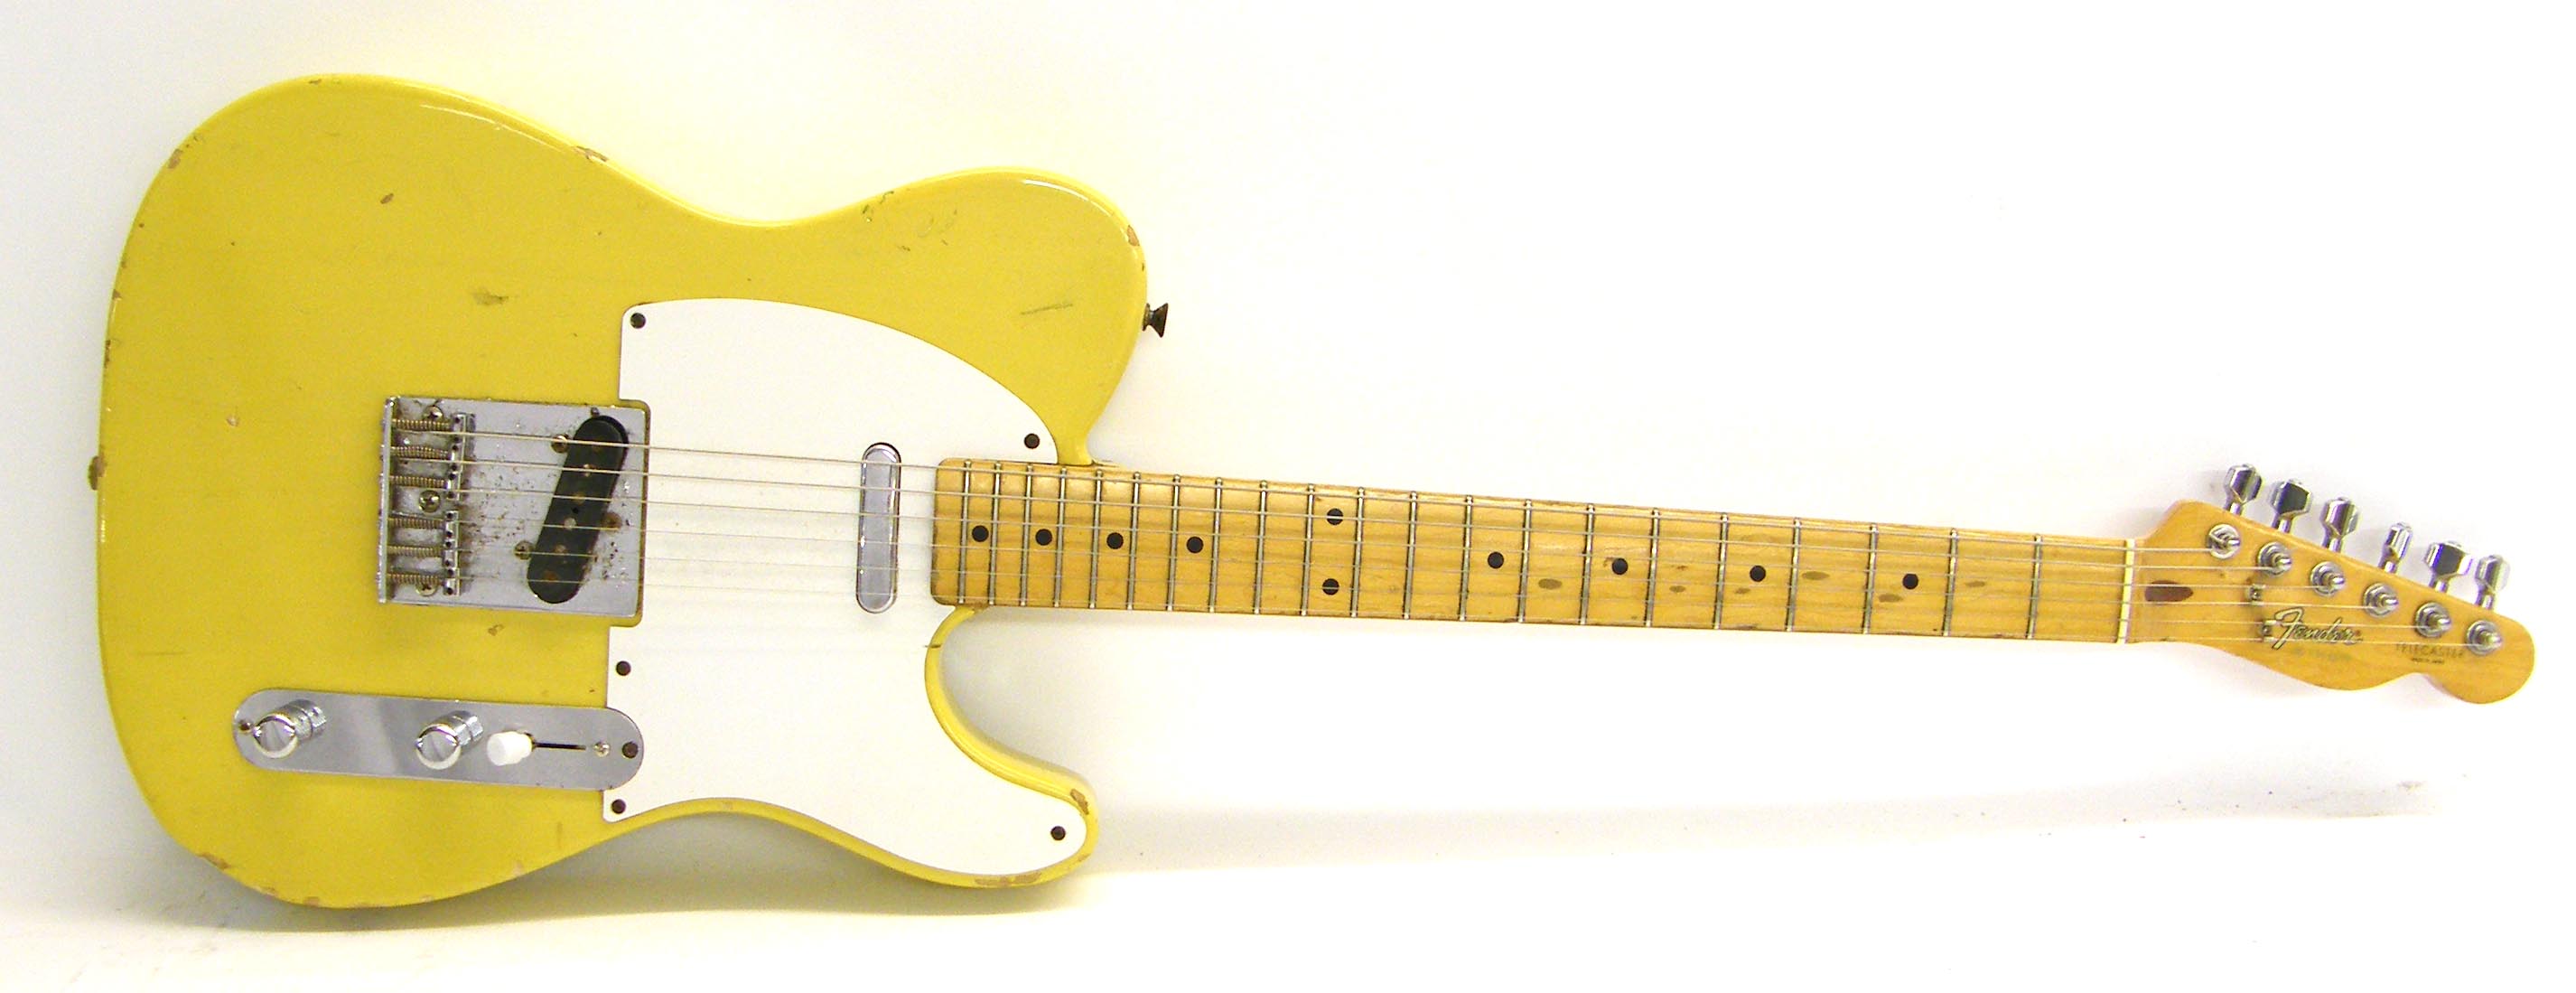 Mid 1980s Fender Telecaster TL-354 electric guitar, made in Japan, ser. no. E955839, blonde finish